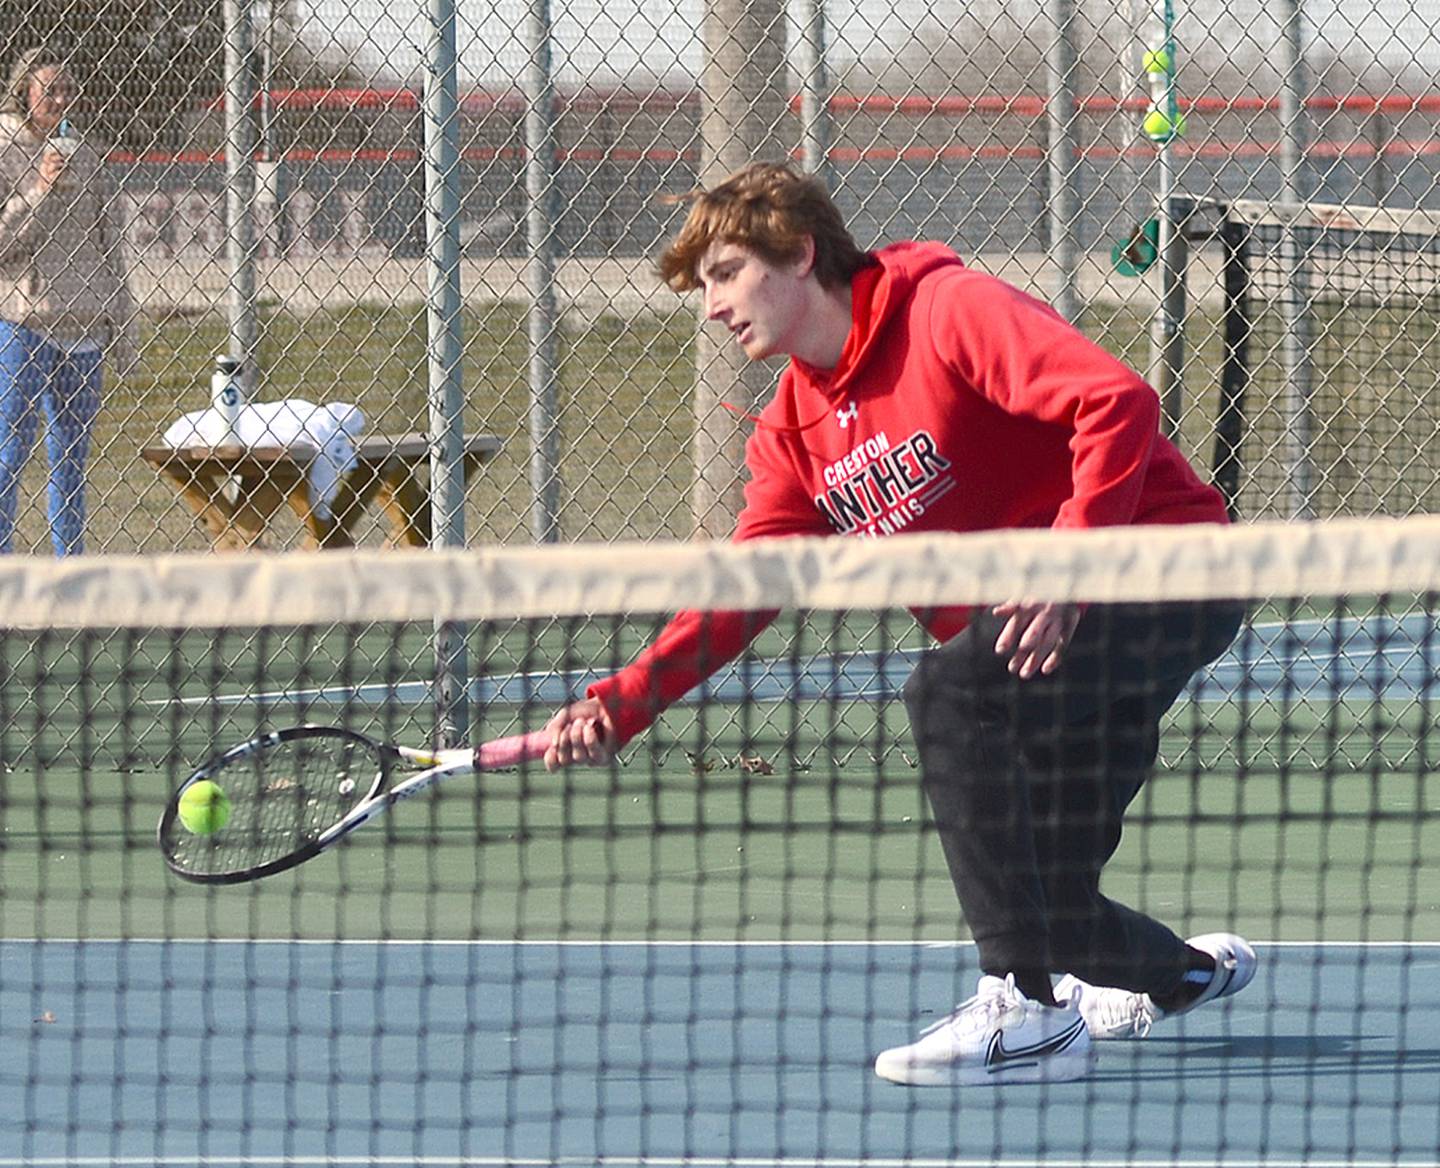 Creston senior Conner Wiley reaches to return a shot against Audubon in the No. 1 singles match Friday.